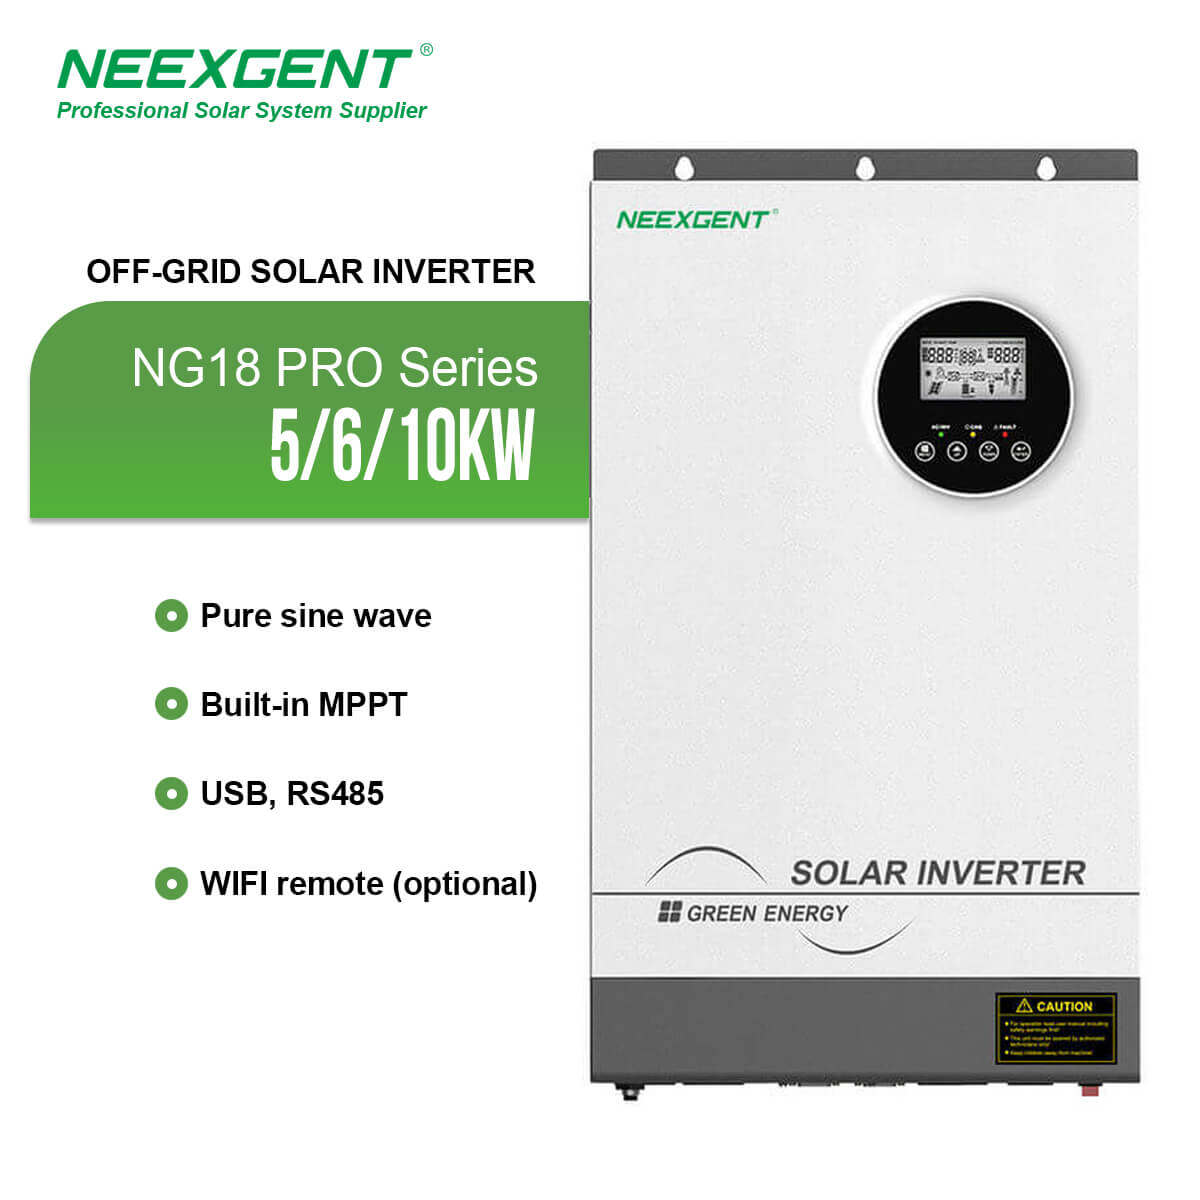 Neexgent Ng1800 Pro Series 5.2kw 48vdc 450vdc High Pv Off Grid Hybrid Solar Inverter Without Battery Use